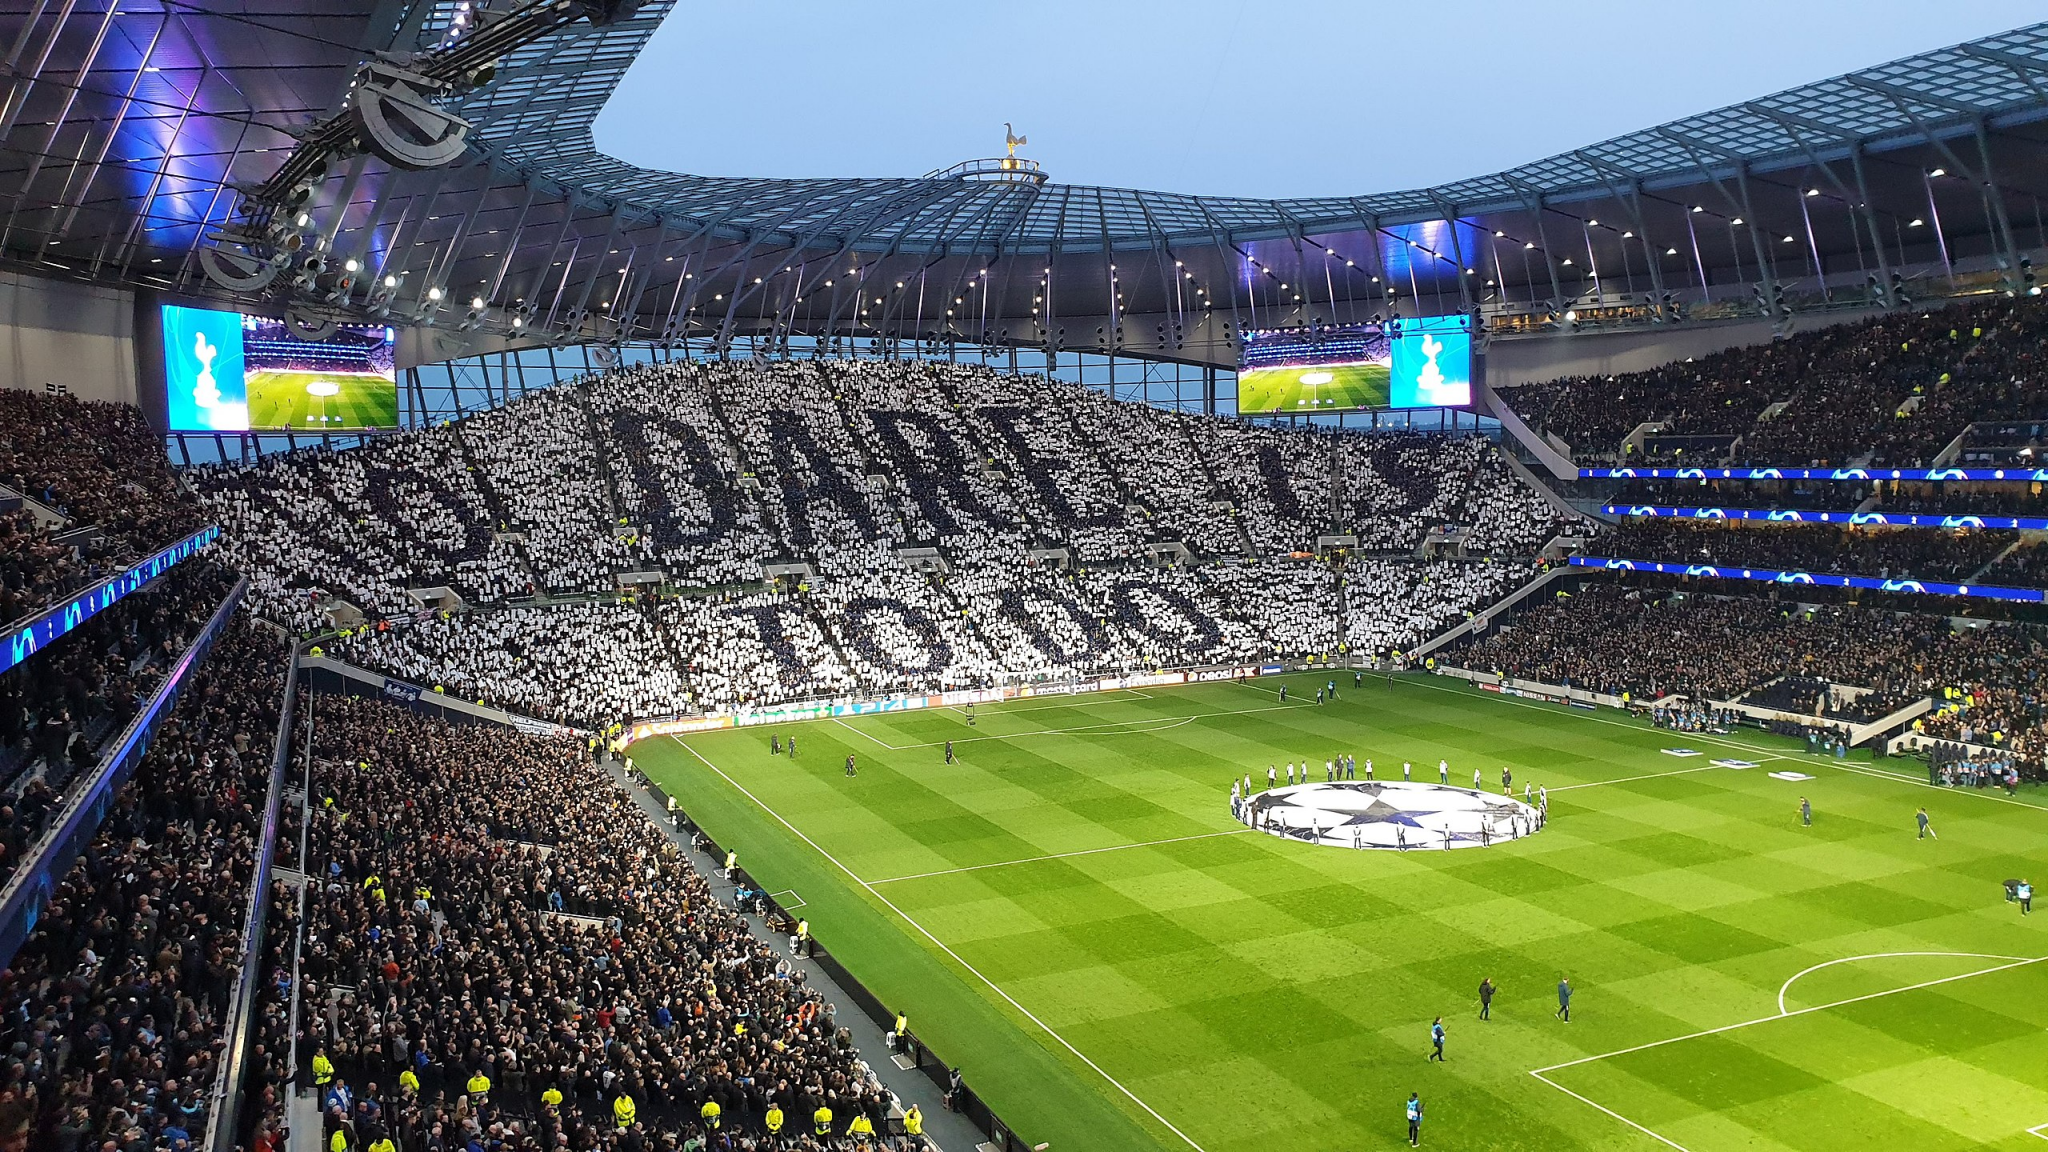 The Tottenham Hotspur Stadium is among the 10 venues proposed as part of the United Kingdom and Ireland bid for UEFA Euro 2028 ©Getty Images